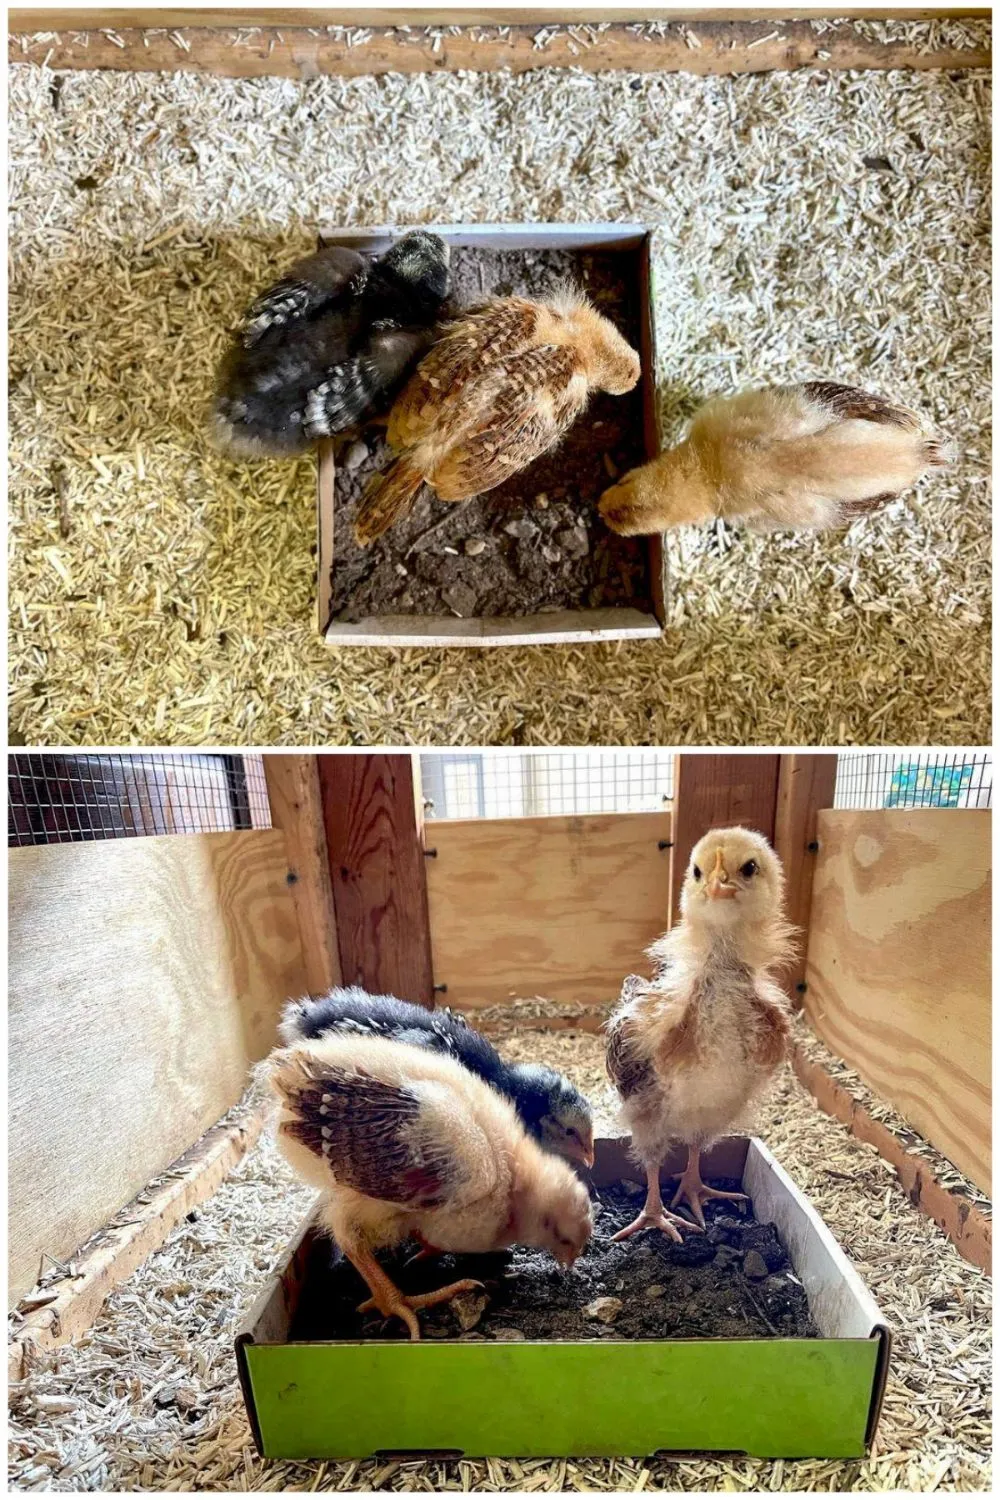 A two part image collage, the first image shows a close up image from above of three baby chicks playing in a chicken dust bath, a tannish blonde and a black chick are both inside the dirt bath while a lighter tan chick is peaking her head inside from outside the box. The second image shows the scene from ground level, all three chicks are inside the bath, picking around mostly while one of them is standing tall, staring straight at the camera. 